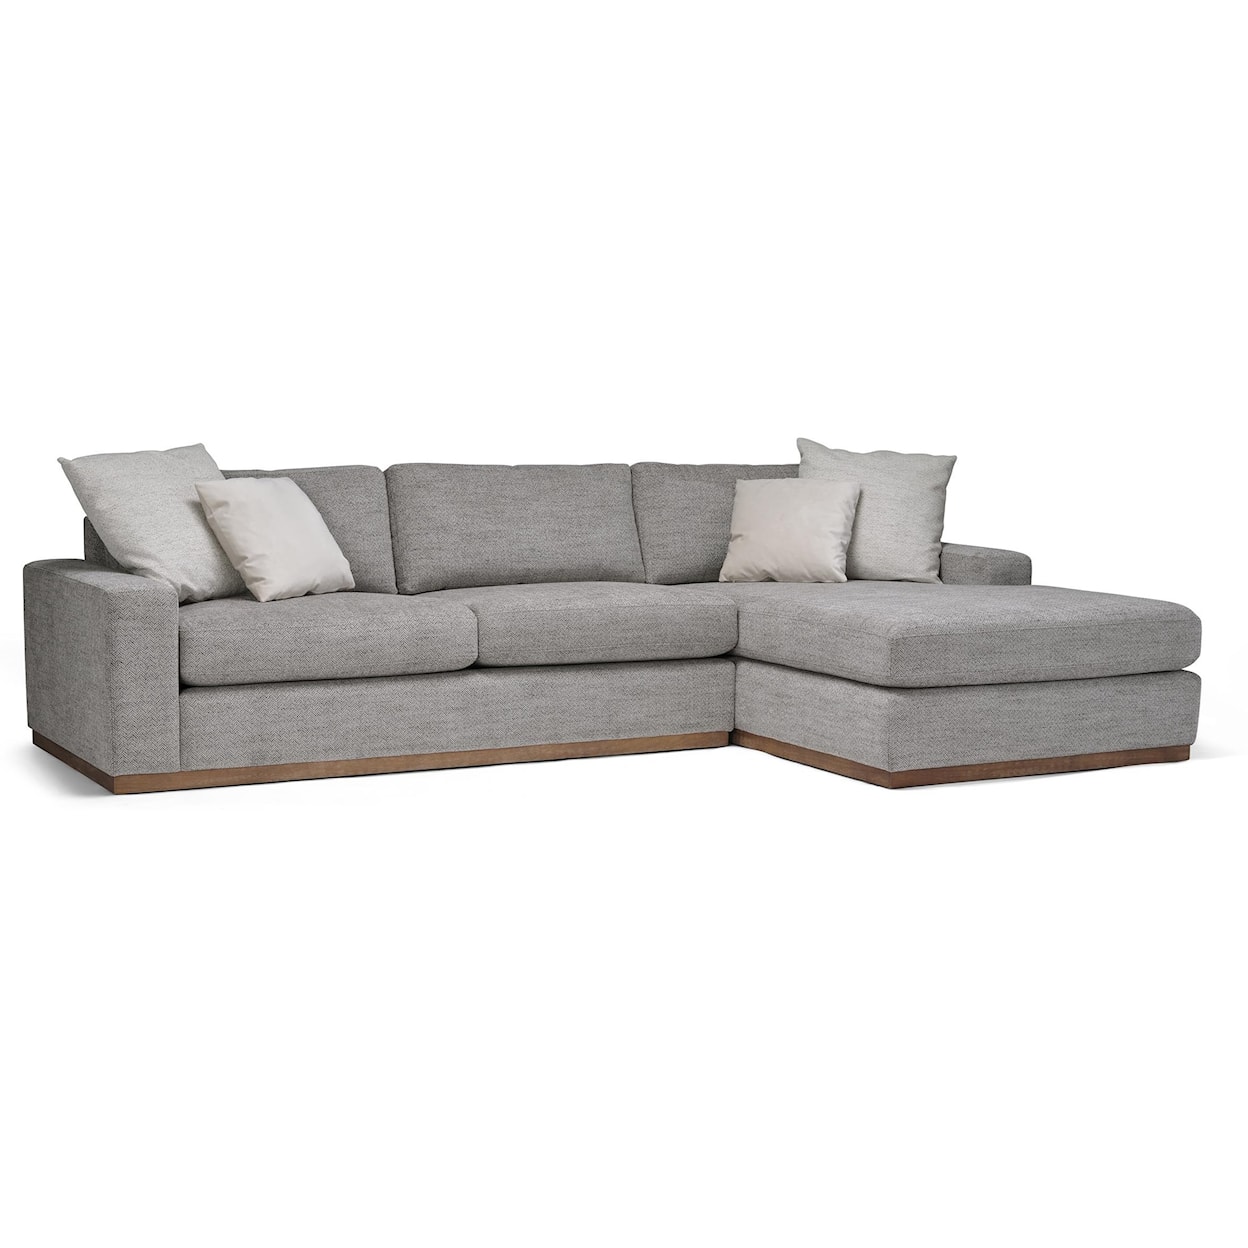 Lewis Home 5620 2 Piece Sectional